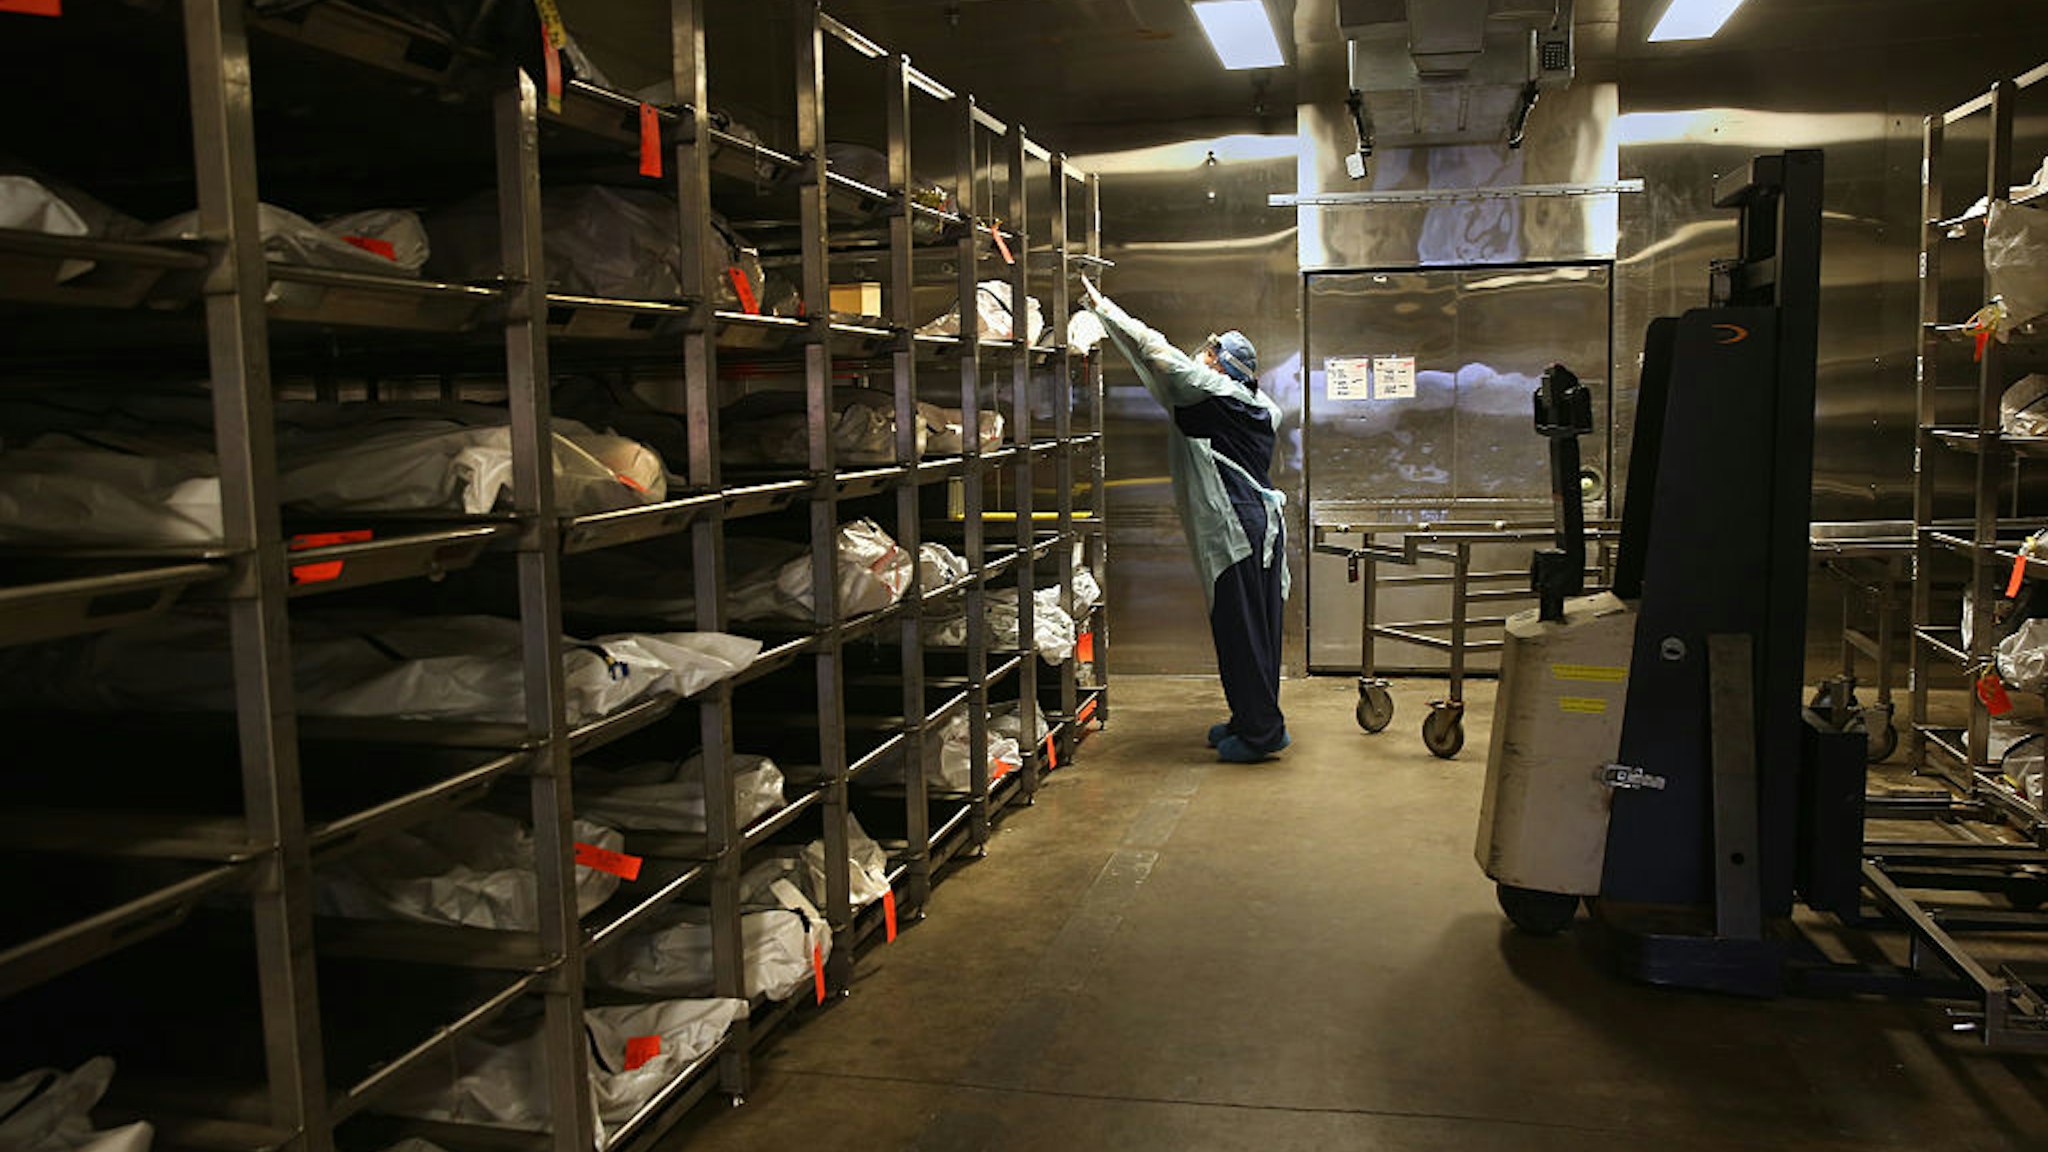 TUCSON, AZ - DECEMBER 09: Forensic technician Kristine Clor handles human remains in the refrigerated morgue of the Pima County Office of the Medical Examiner on December 9, 2014 in Tucson, Arizona. Forensic anthropologists attempt to identify the deceased by studying personal effects and bodily remains. Most are from undocumented immigrants, many of whom died of dehydration while crossing illegally into the U.S. from Mexico. The center currently has 90 bodies in the morgue and, on average, receives 176 per year, most found by ranchers and Border Patrol agents. Identified remains are repatriated, along with personal items, to their home countries, and the others will be cremated. (Photo by John Moore/Getty Images)